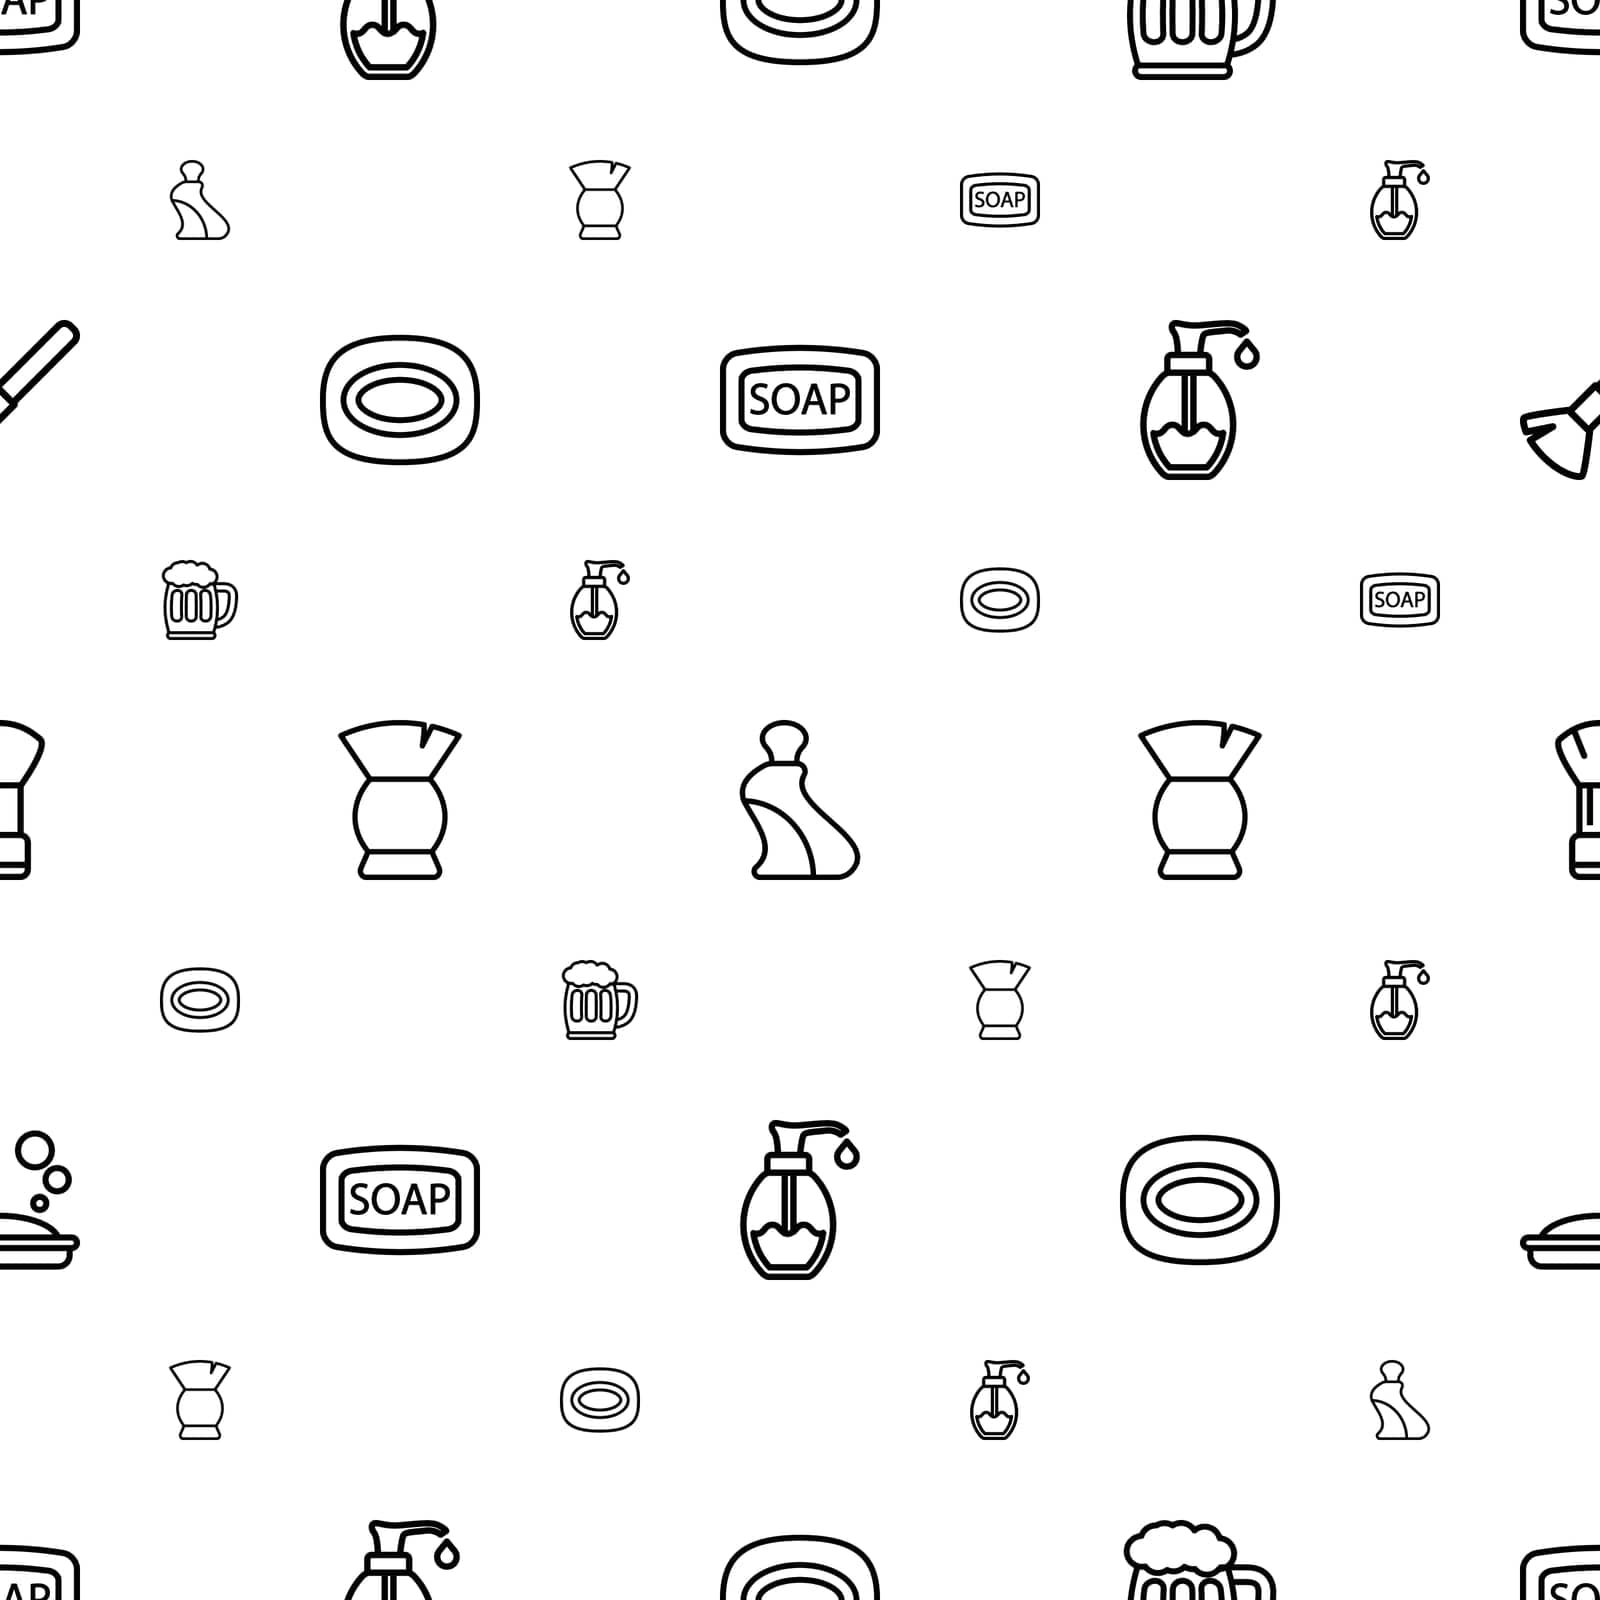 symbol,beauty,foam,pattern,icon,sign,skin,isolated,for,hair,bar,white,bubble,web,hygiene,and,design,vector,bath,graphic,beer,bathroom,brush,black,wash,mobile,health,cream,shaving,clean,water,cleanliness,plastic,tube,background,illustration,mug,soap,object,care